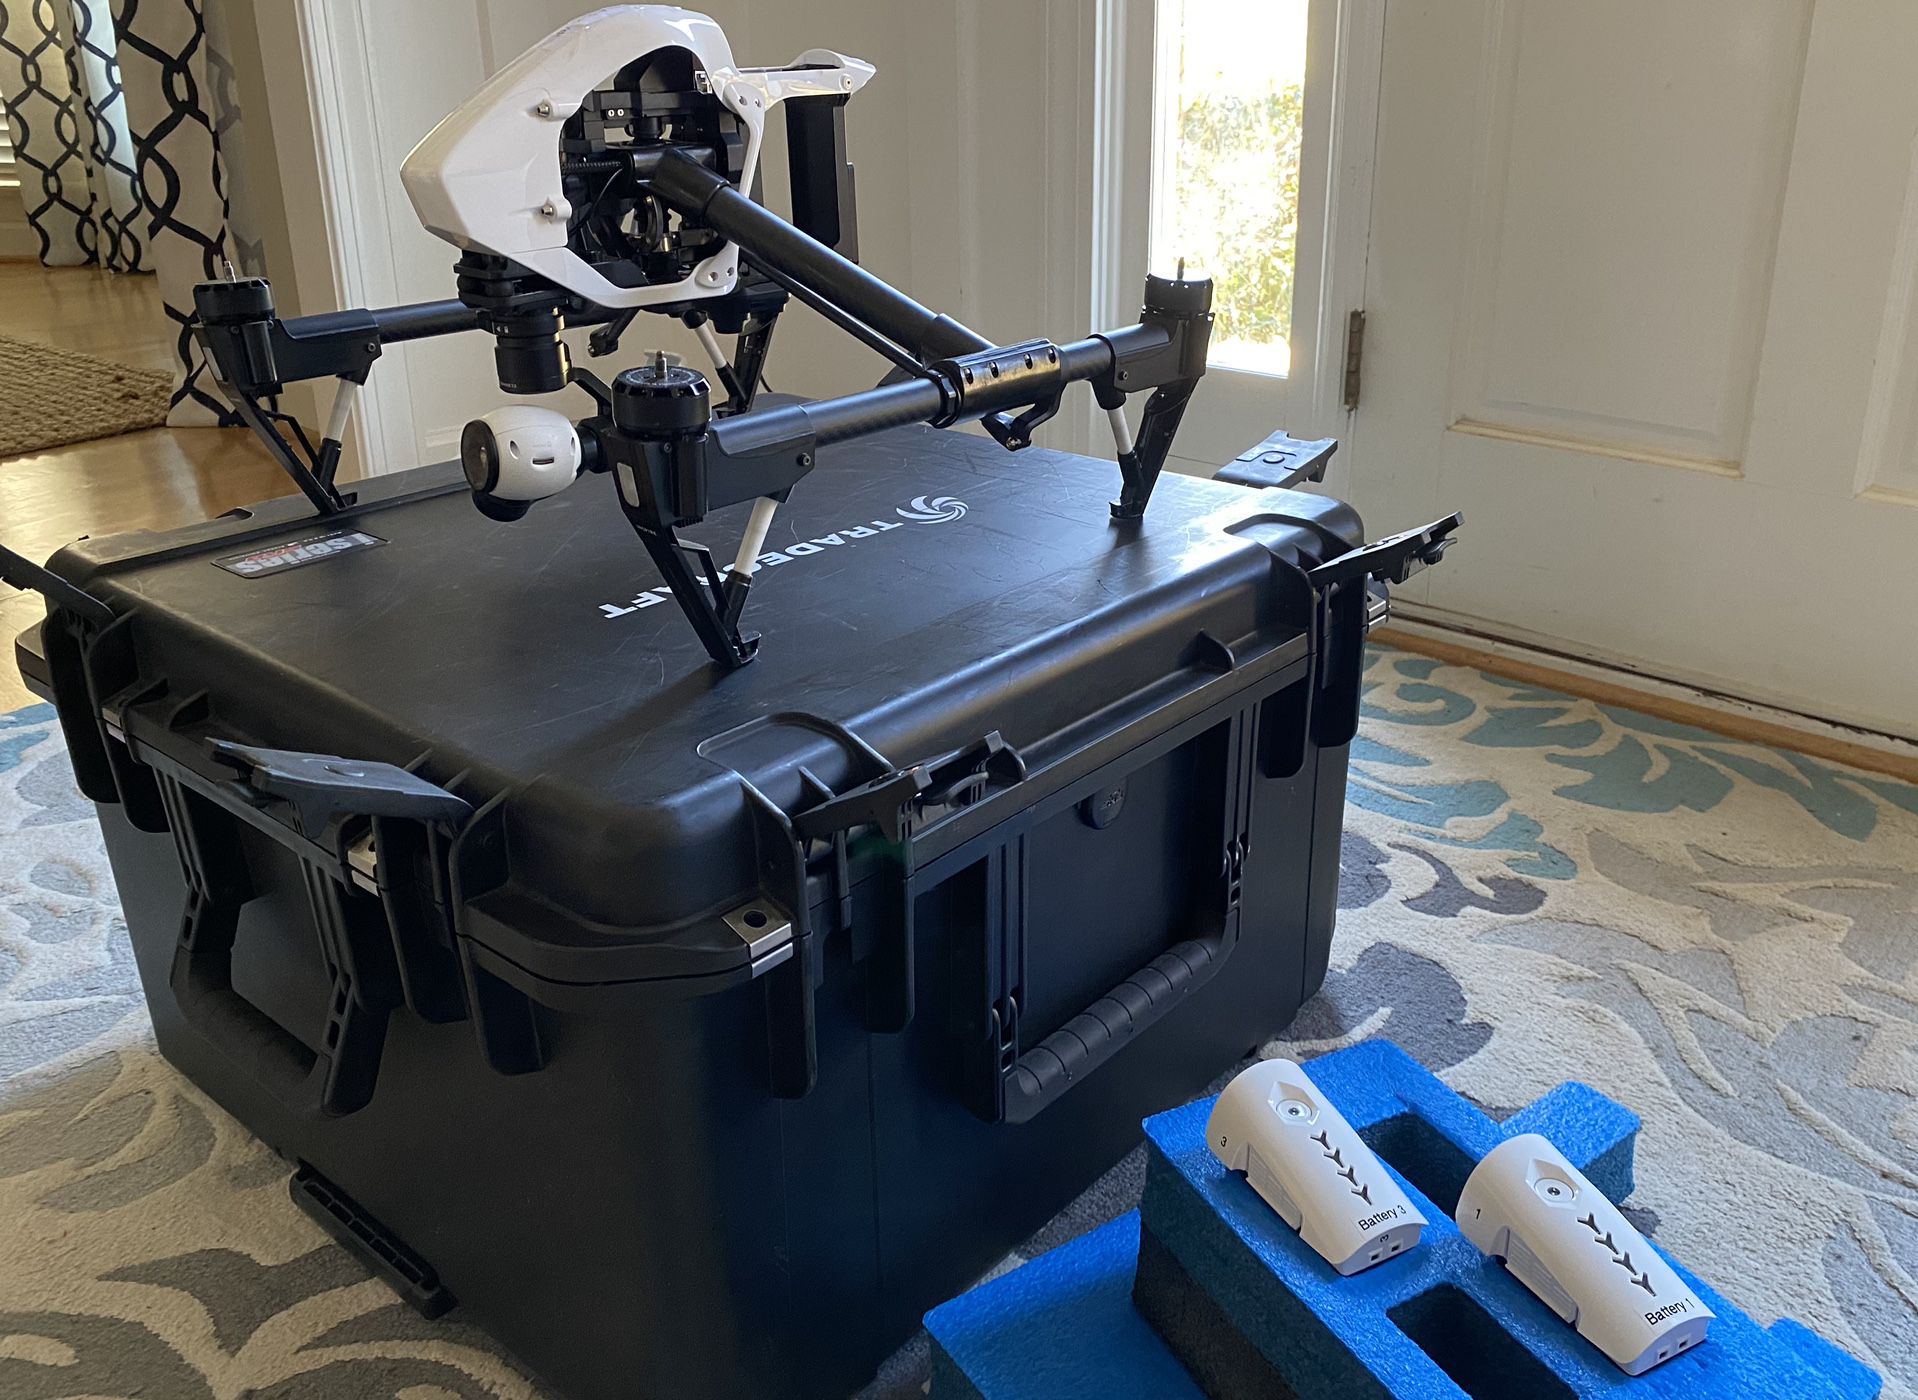 DJI Inspire 1 With Hard Case